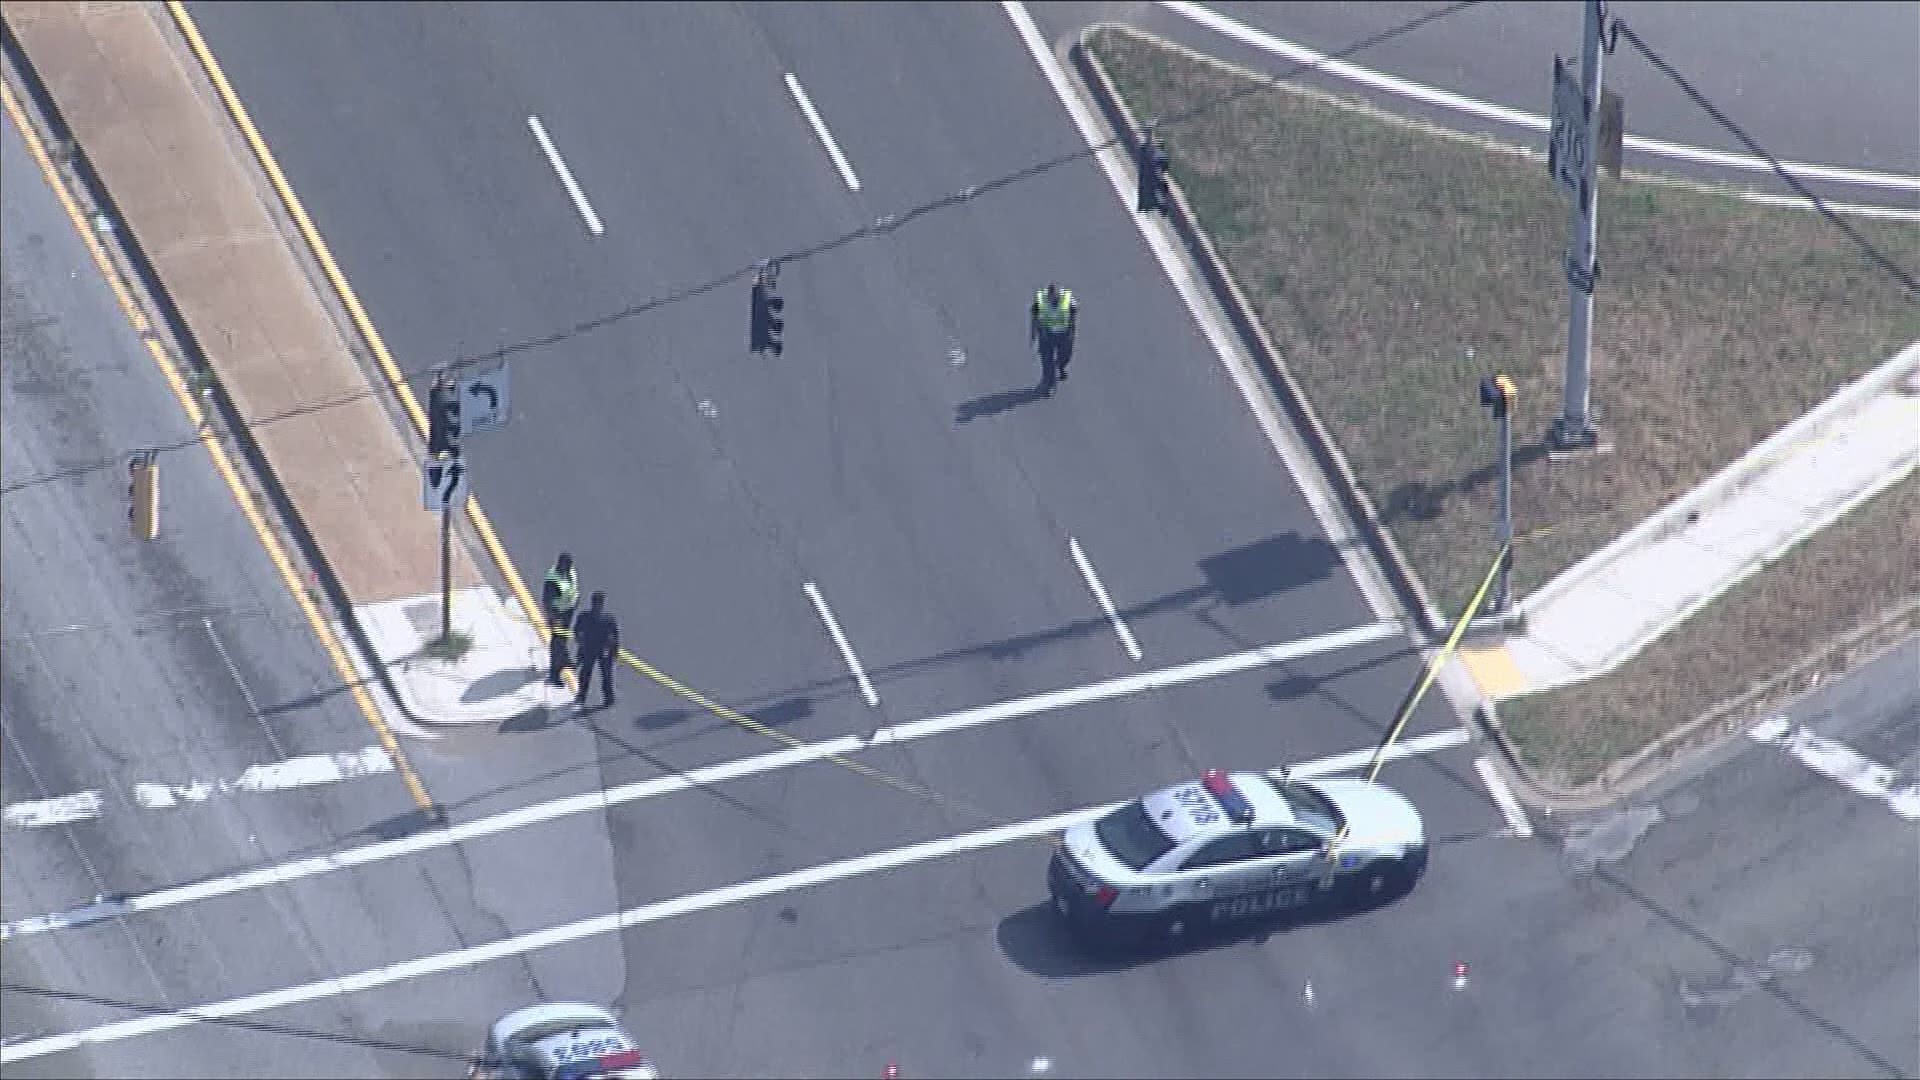 A pedestrian was struck by an off-duty Prince George's County police officer Tuesday morning, officials said.

An off-duty officer was making a left turn from Livingston Road onto northbound Maryland Route 210 at 8:07 a.m. when for reasons that remain under investigation struck a pedestrian who was crossing MD 210, officials said.

The man was flown to a hospital as a precaution with non-life-threatening, police said.